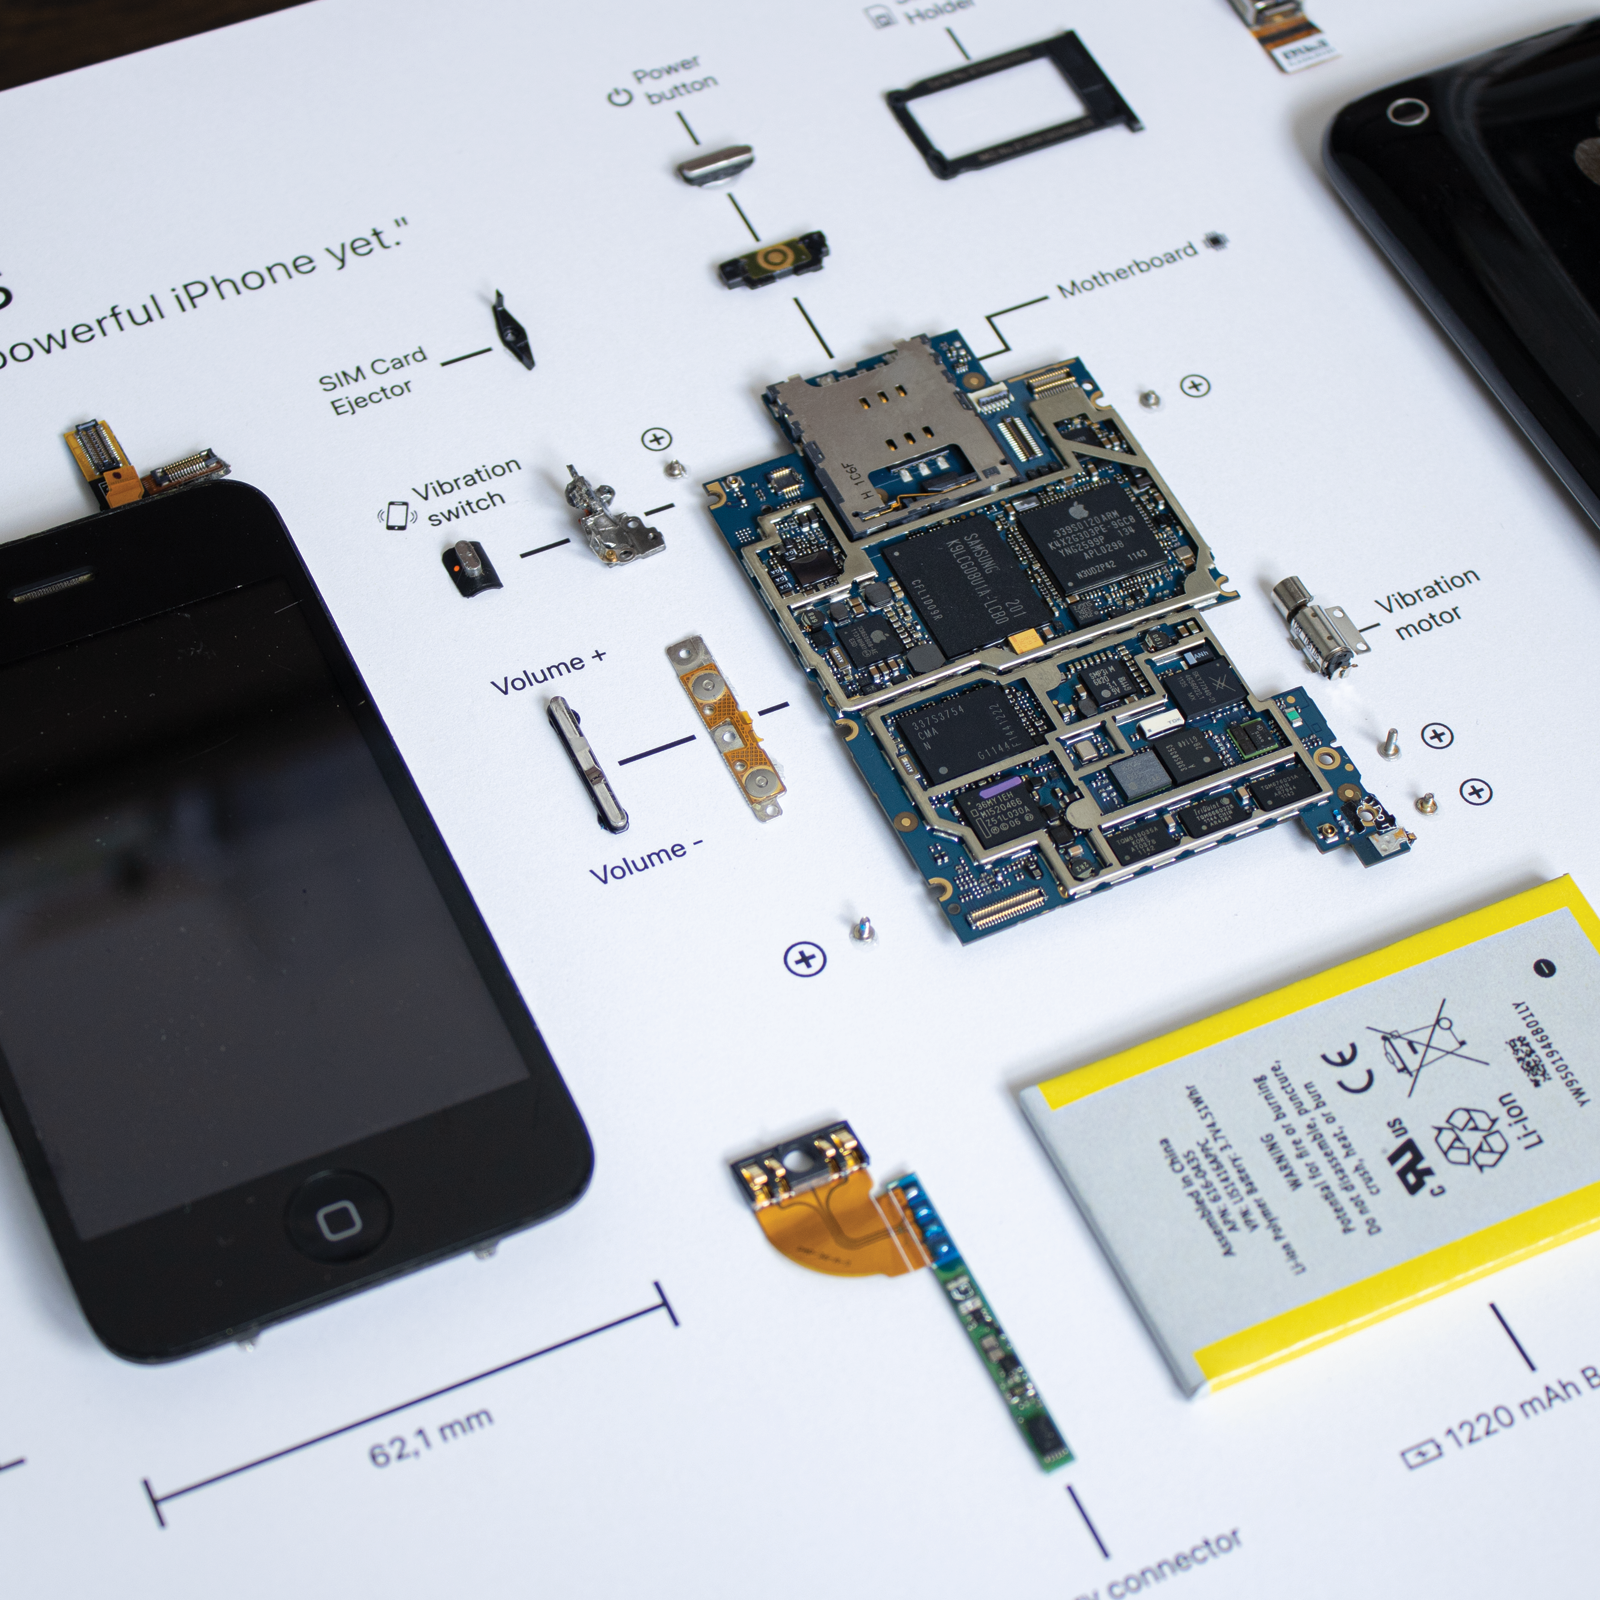 iPhone 3GS disassembled in a frame